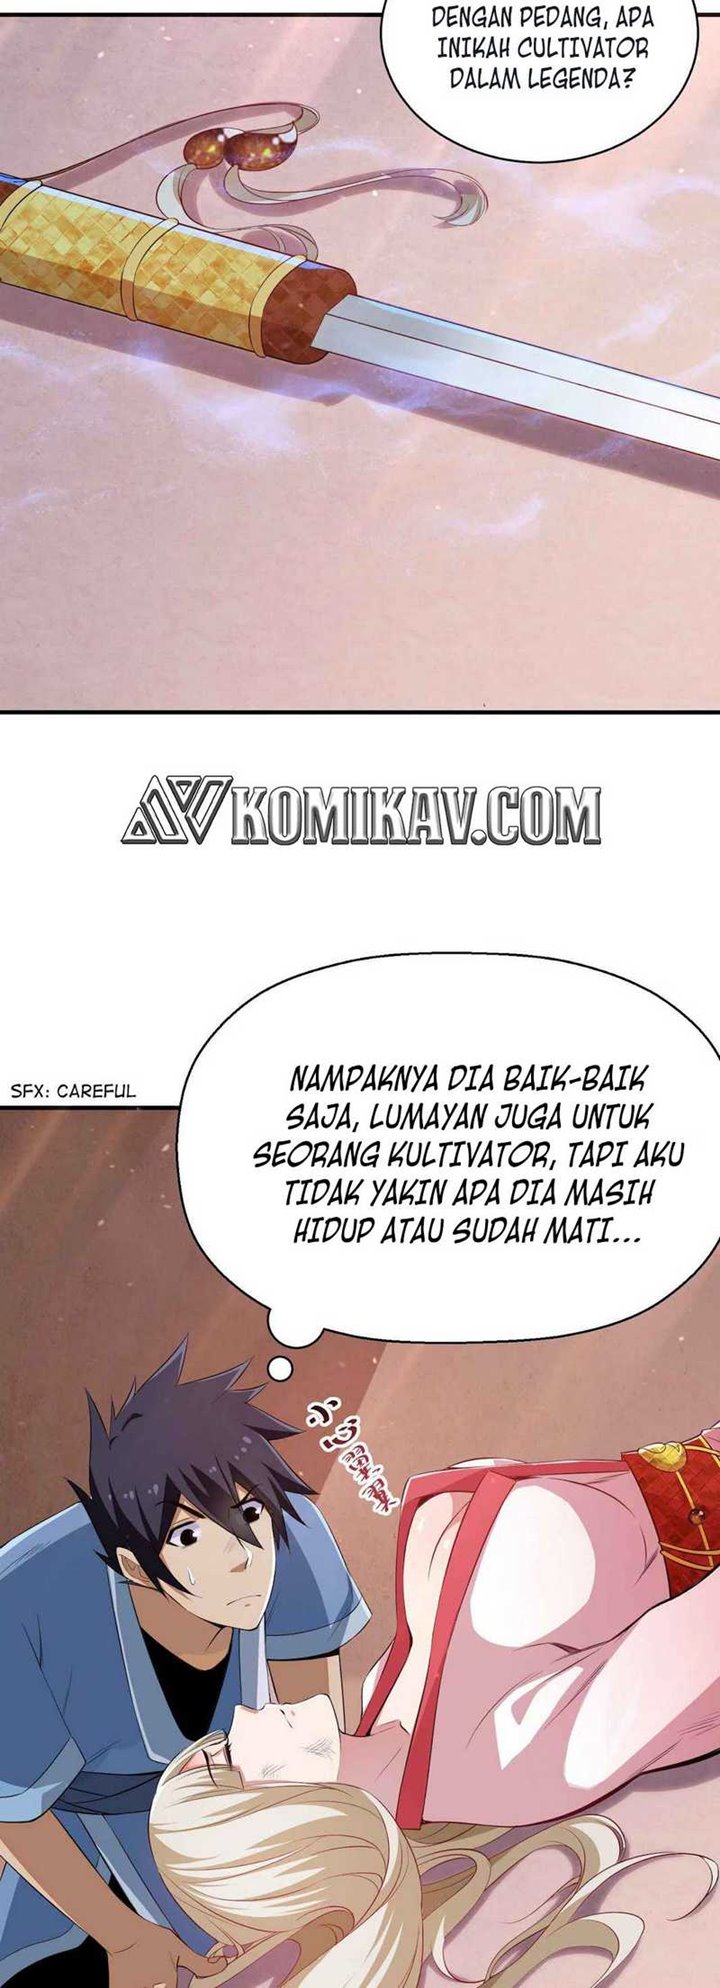 Dilarang COPAS - situs resmi www.mangacanblog.com - Komik i just want to be beaten to death by everyone 003 - chapter 3 4 Indonesia i just want to be beaten to death by everyone 003 - chapter 3 Terbaru 3|Baca Manga Komik Indonesia|Mangacan